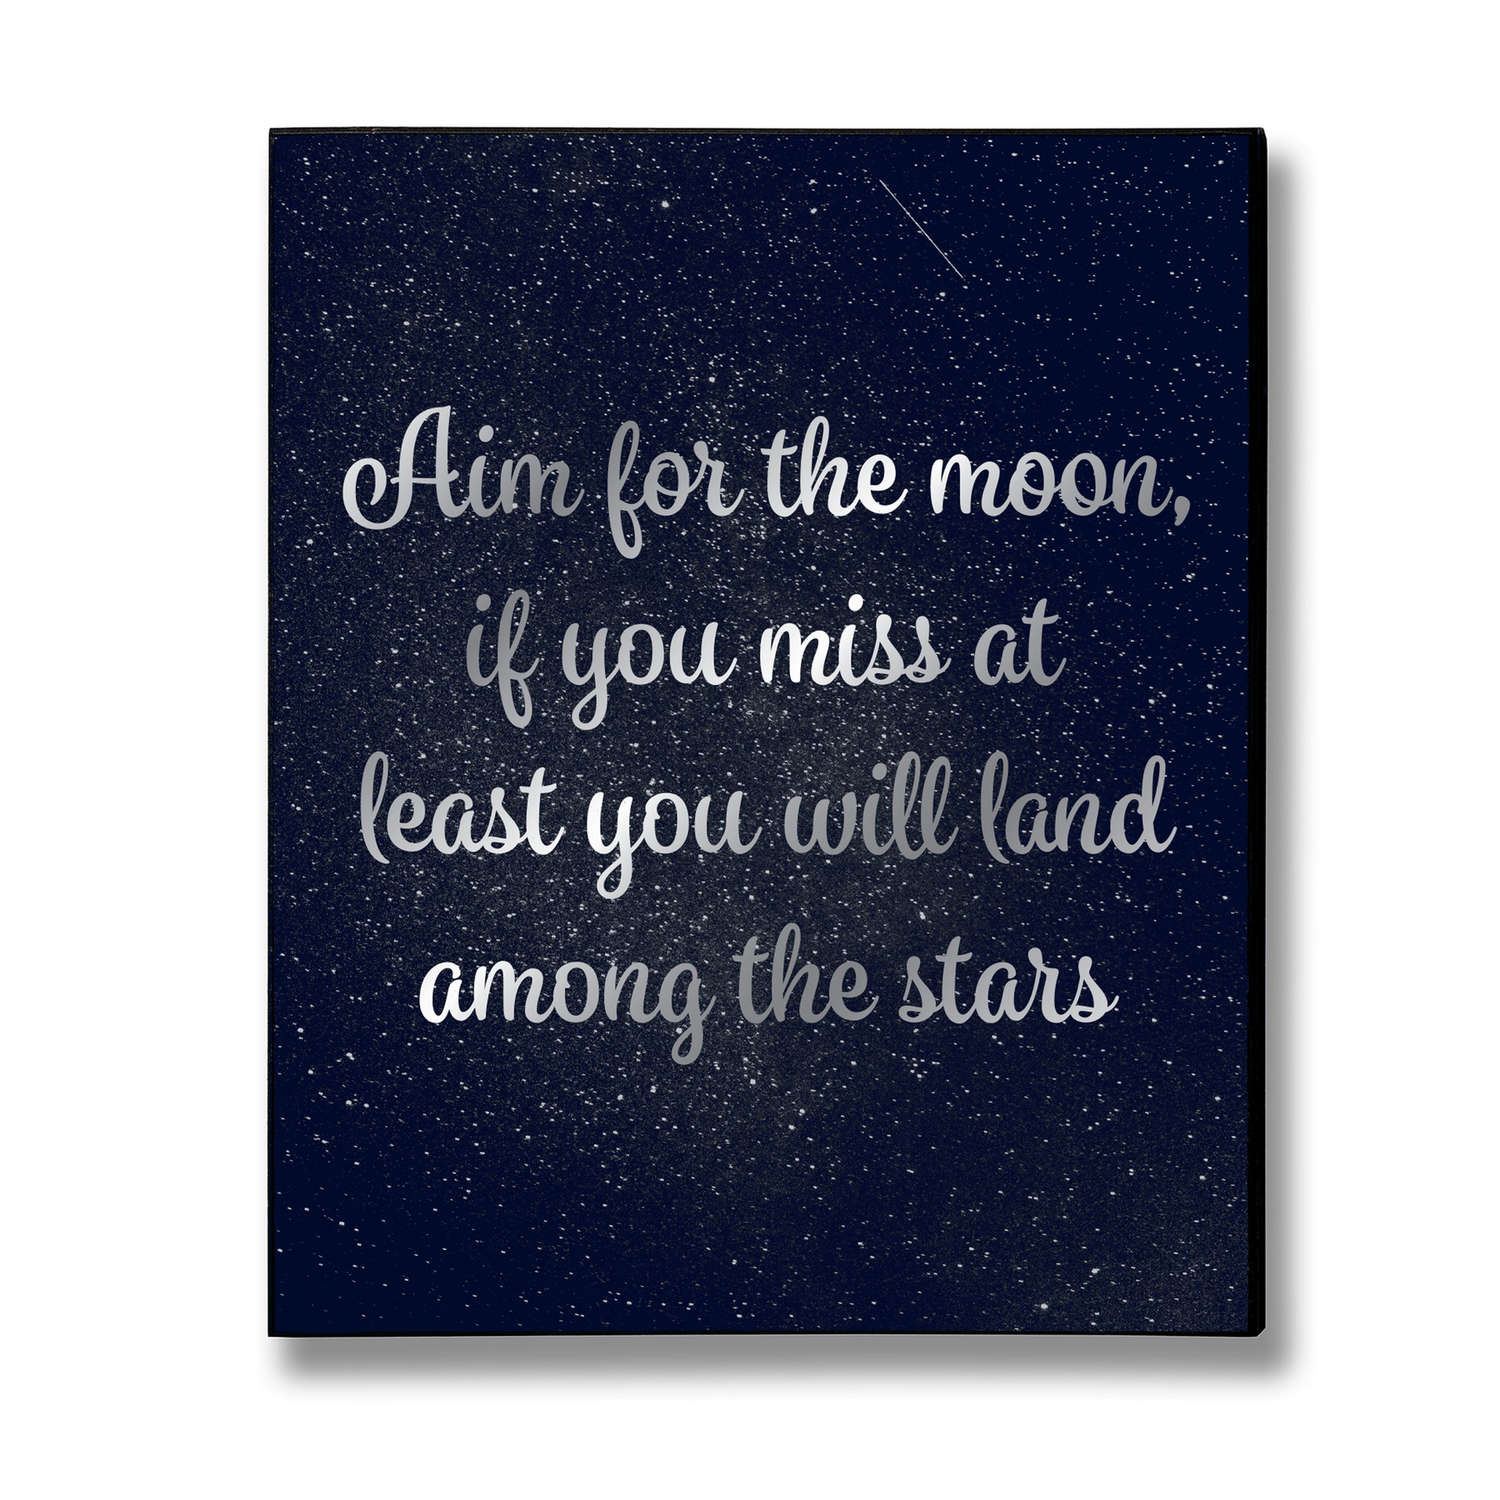 Aim For The Moon Silver Foil Plaque - Image 1